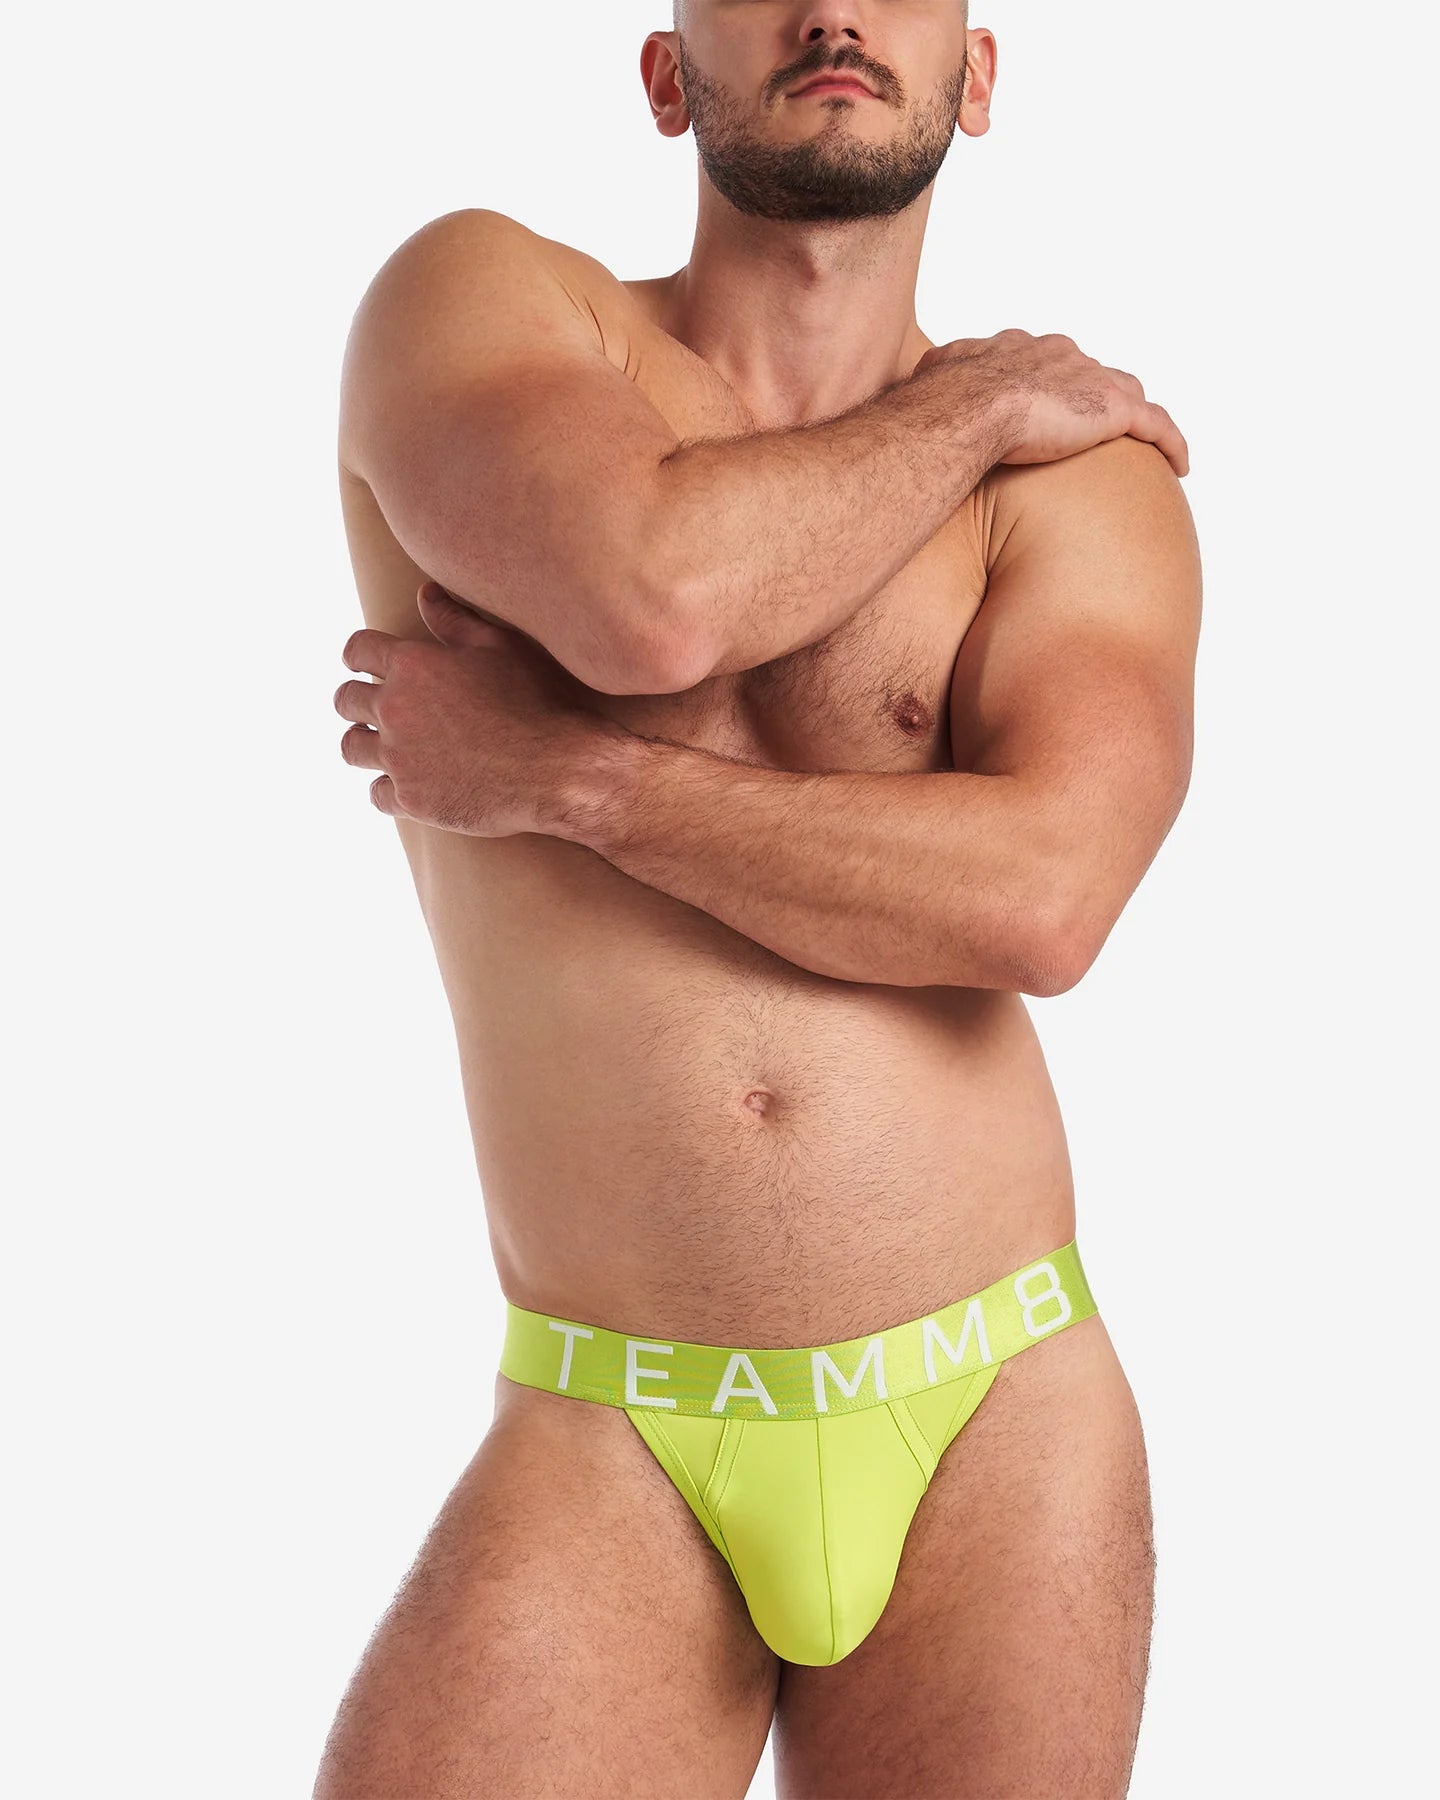 Teamm8 Spartacus thong lime punch